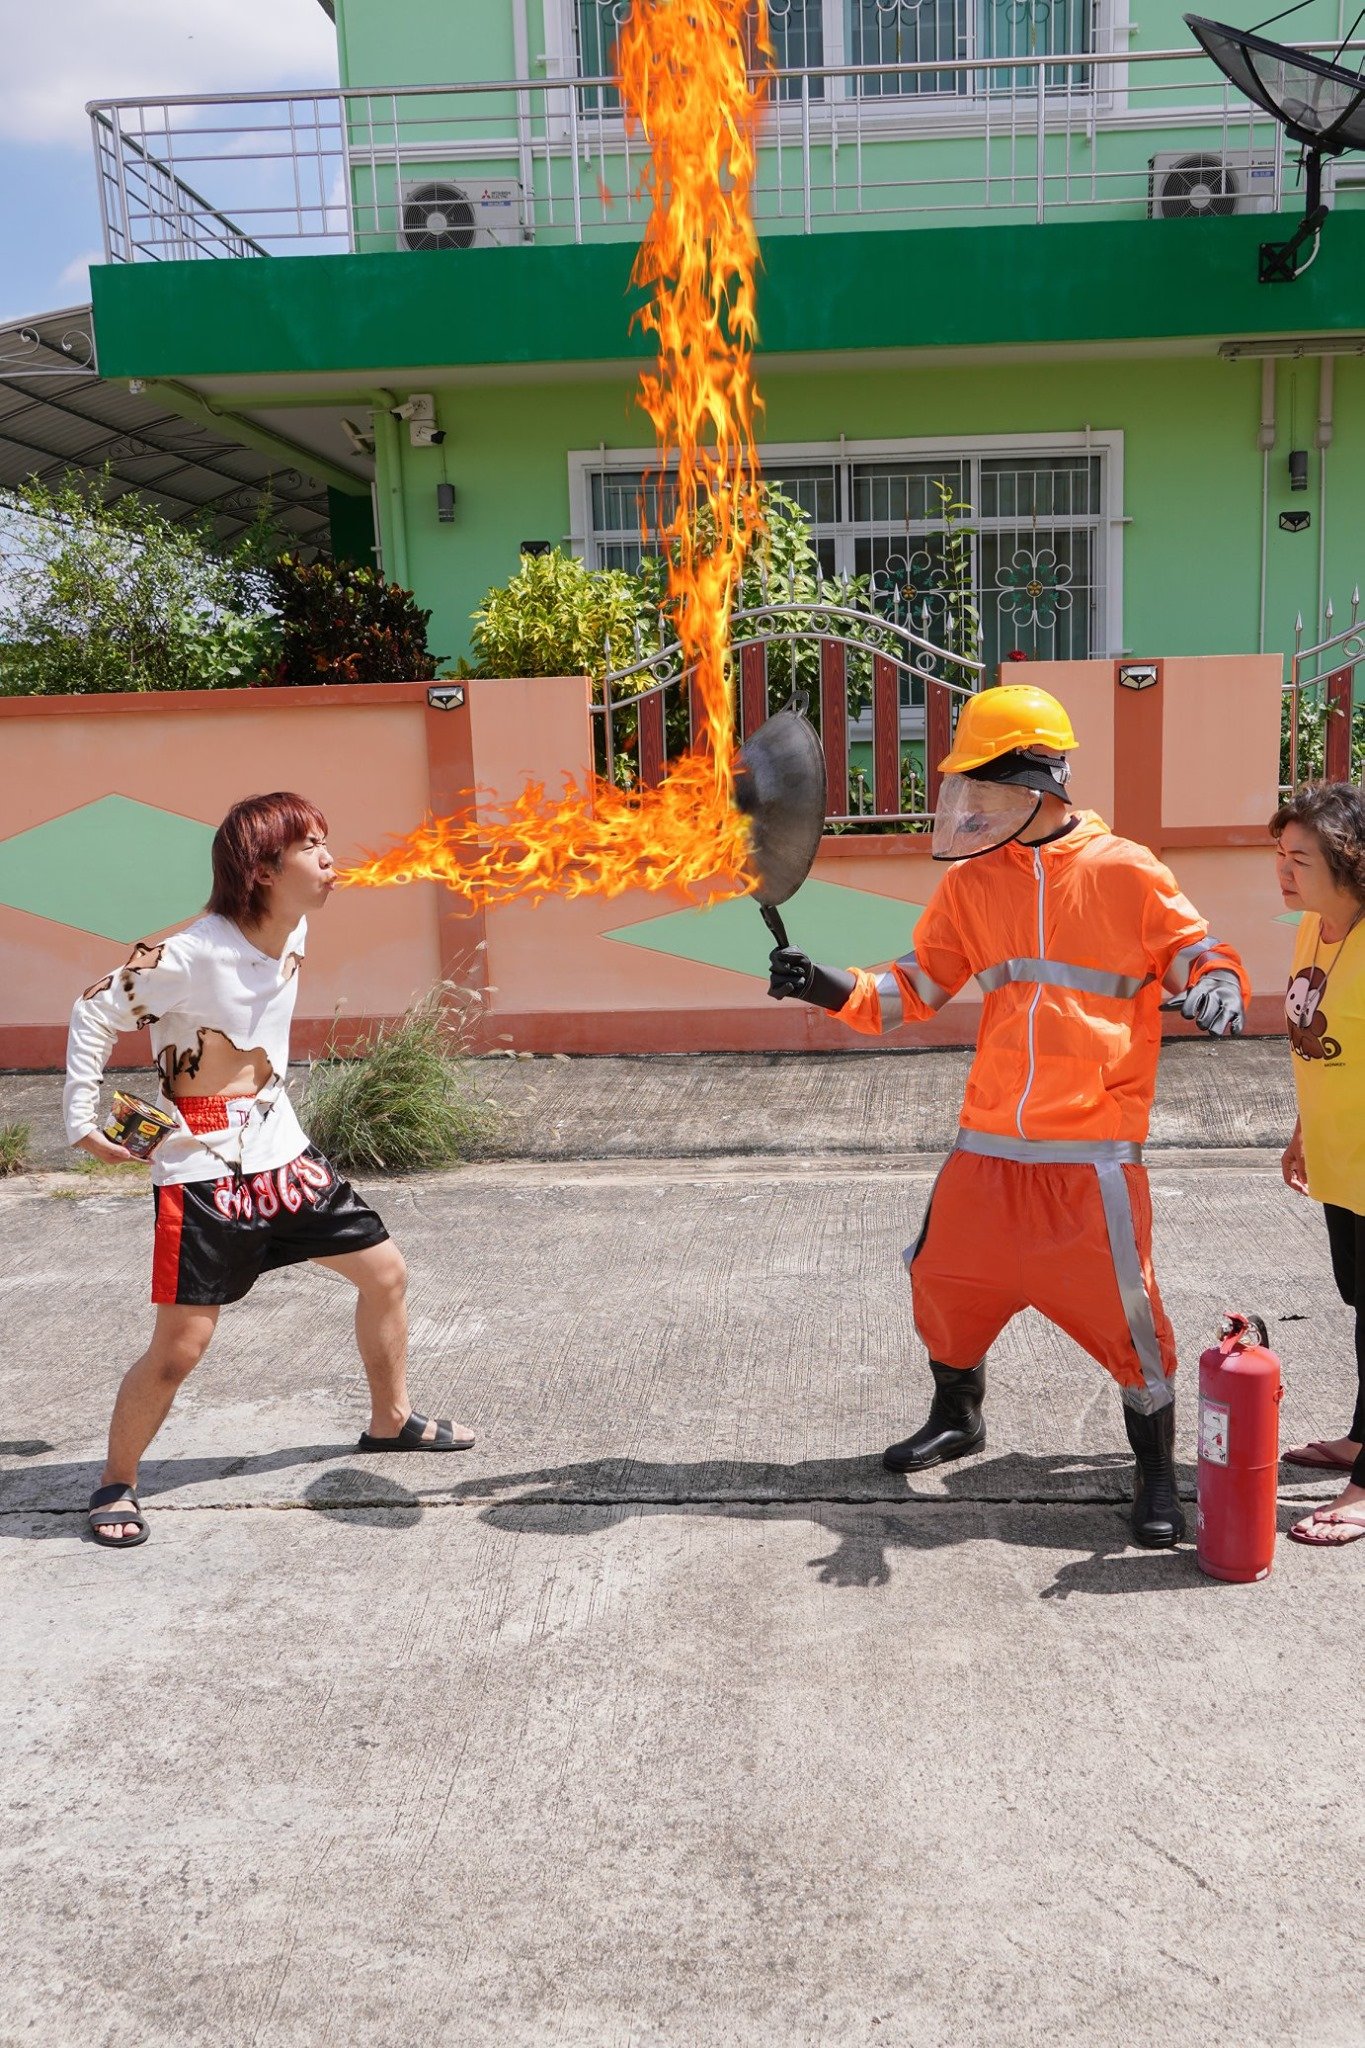 Thai Cup Noodles Ad Has Plot That's So Nonsensical, It's Caught On Like A  House On Fire